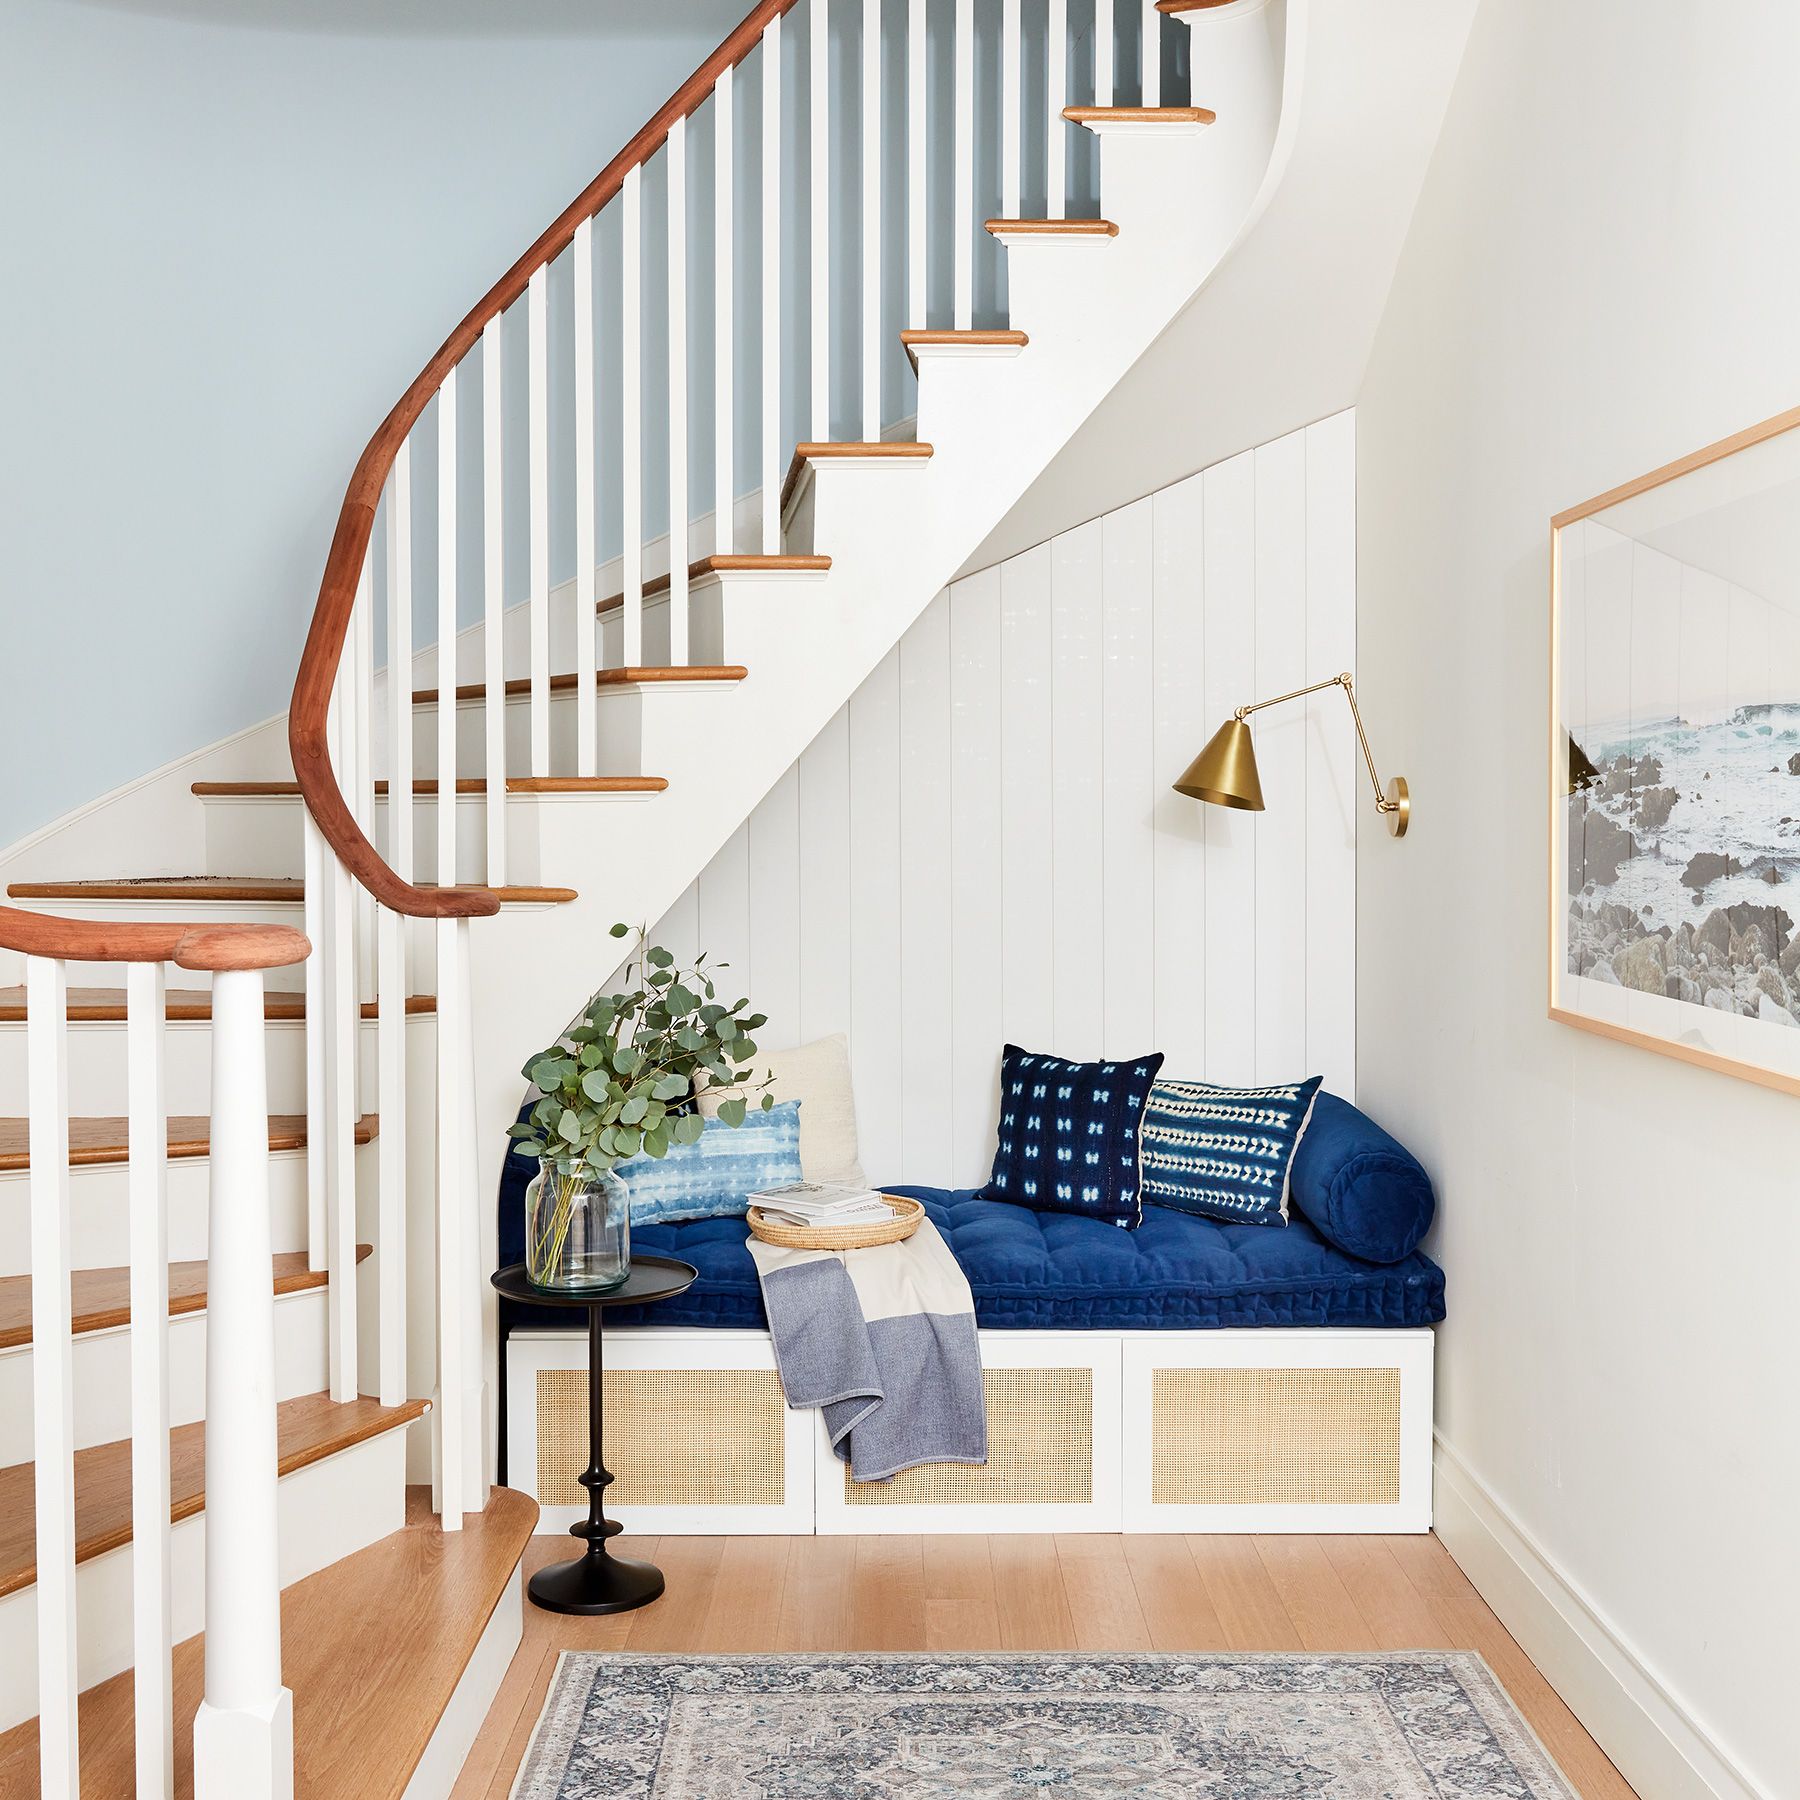 2020 Real Simple Home Tour: Trappor med shiplap